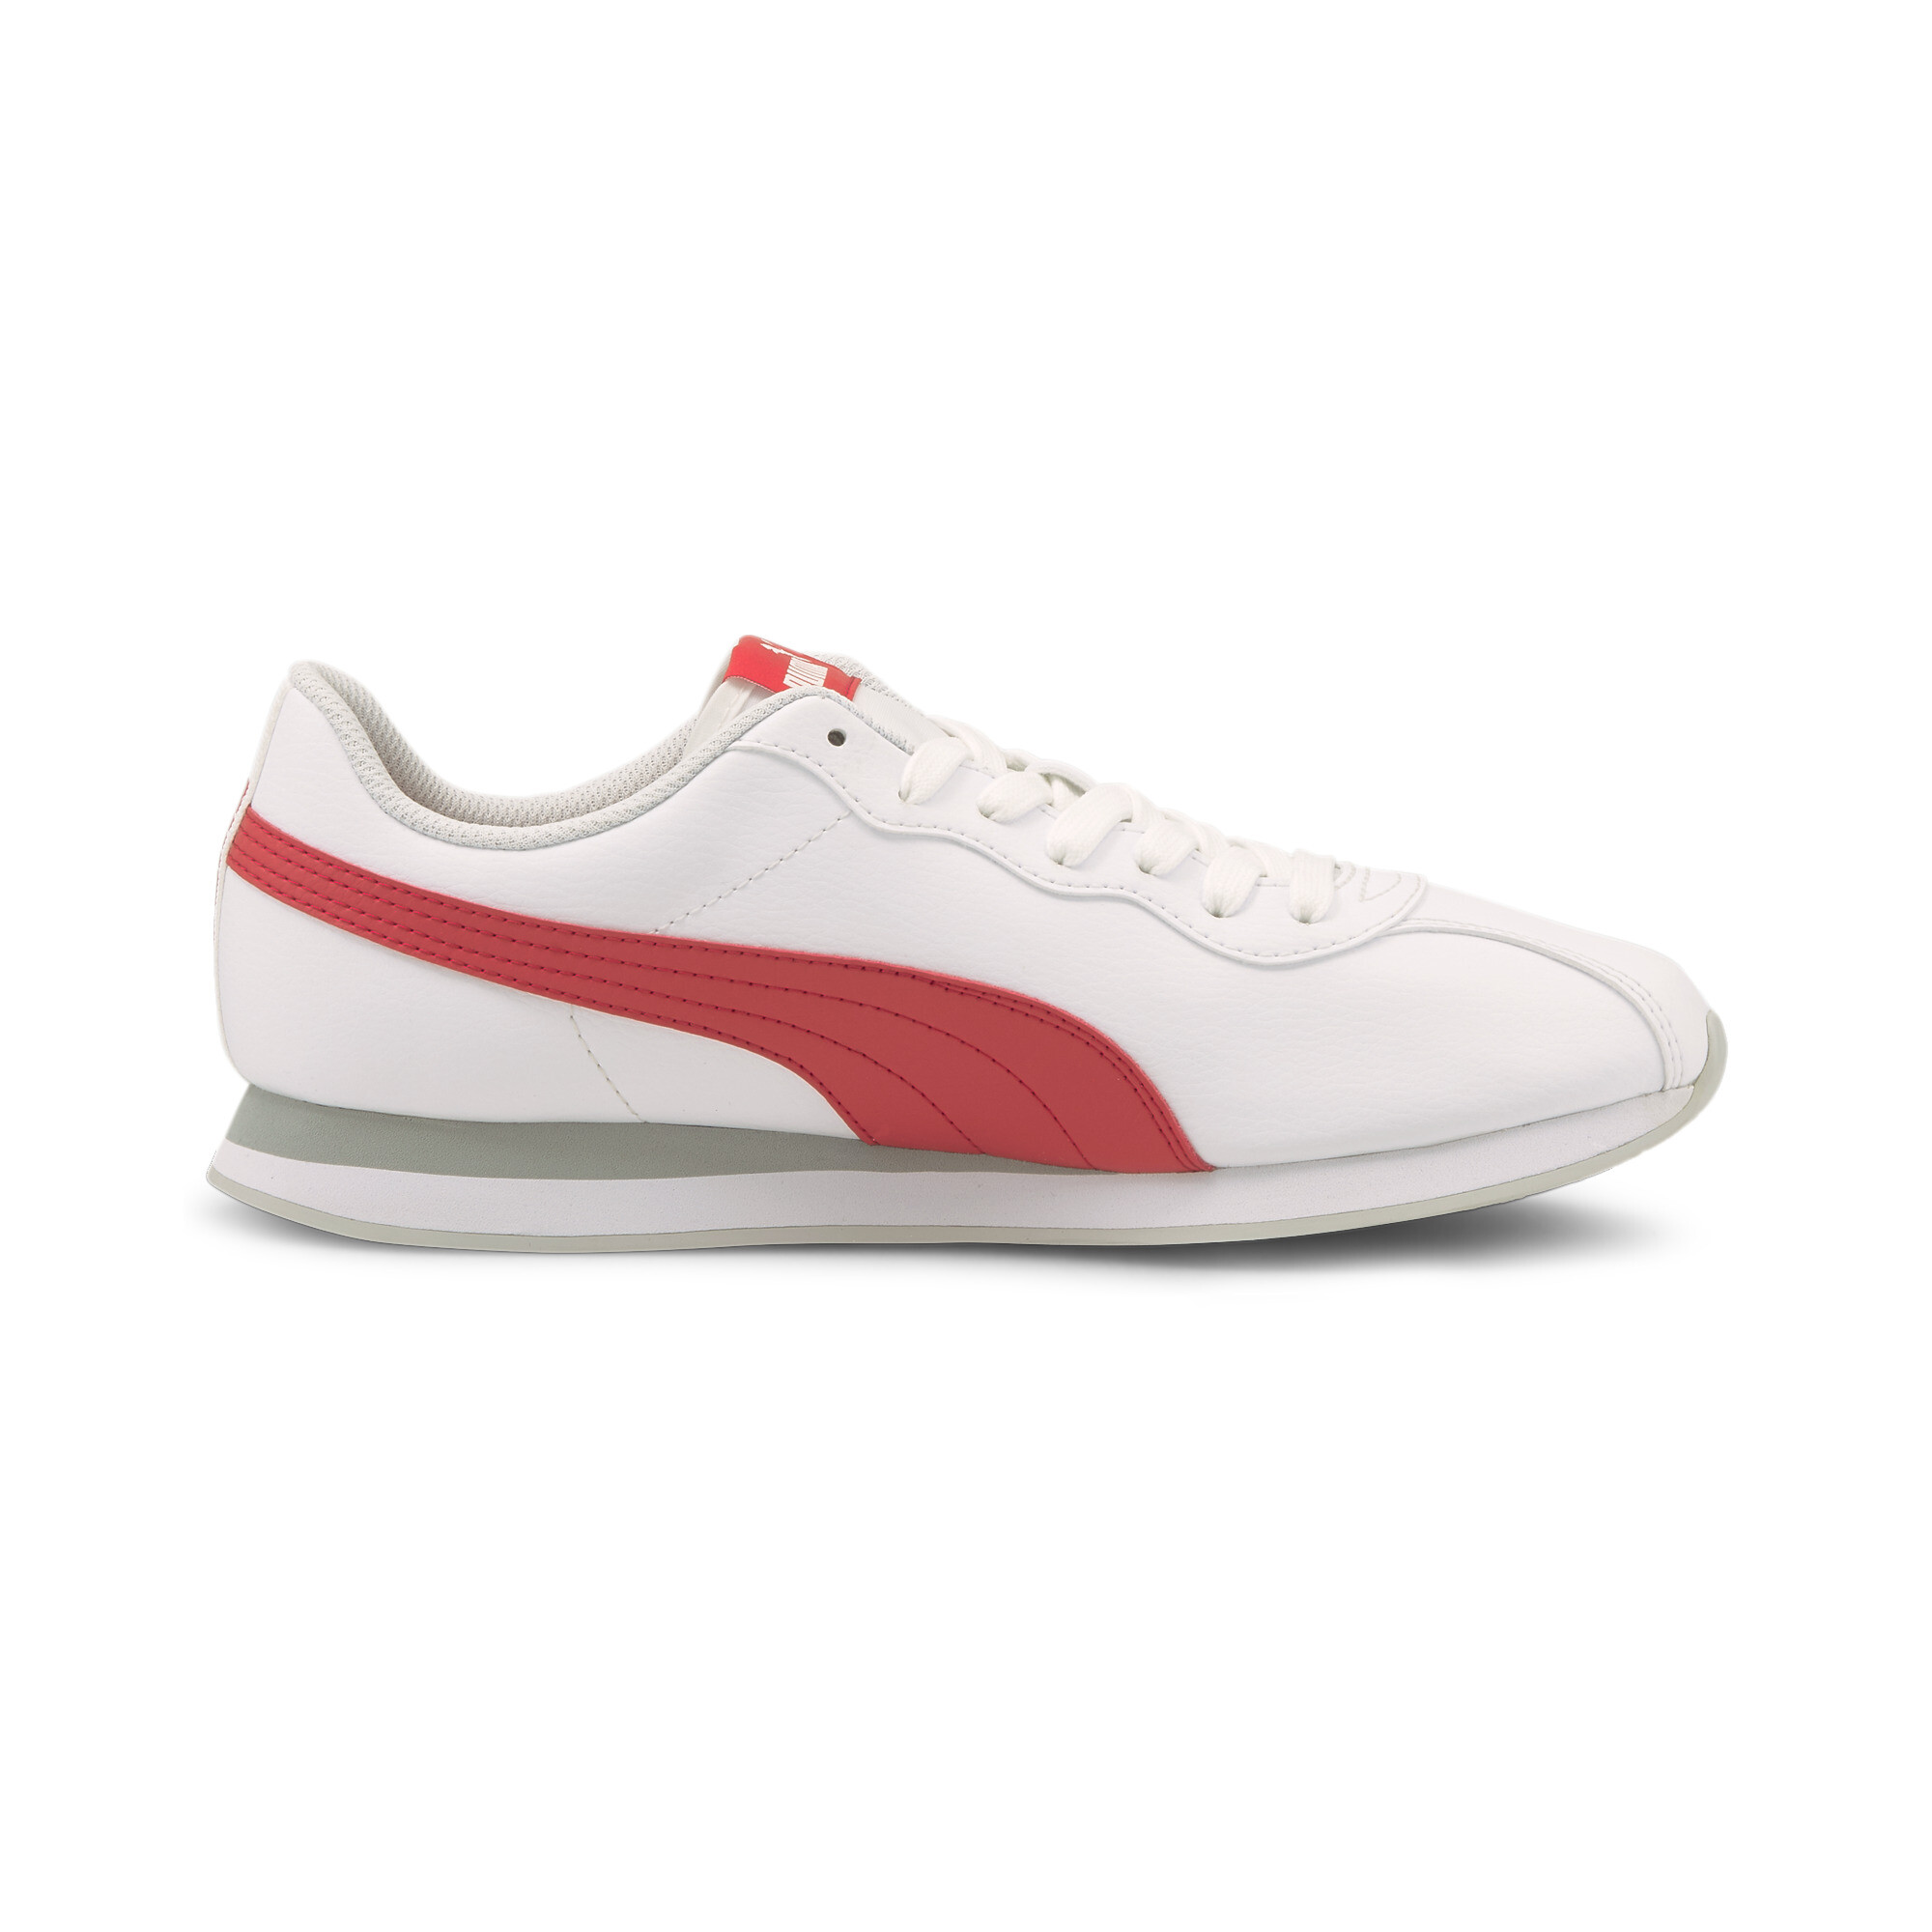 Men's PUMA white/red 186996 TURIN Sport Lifestyle Leather Running Shoes ...